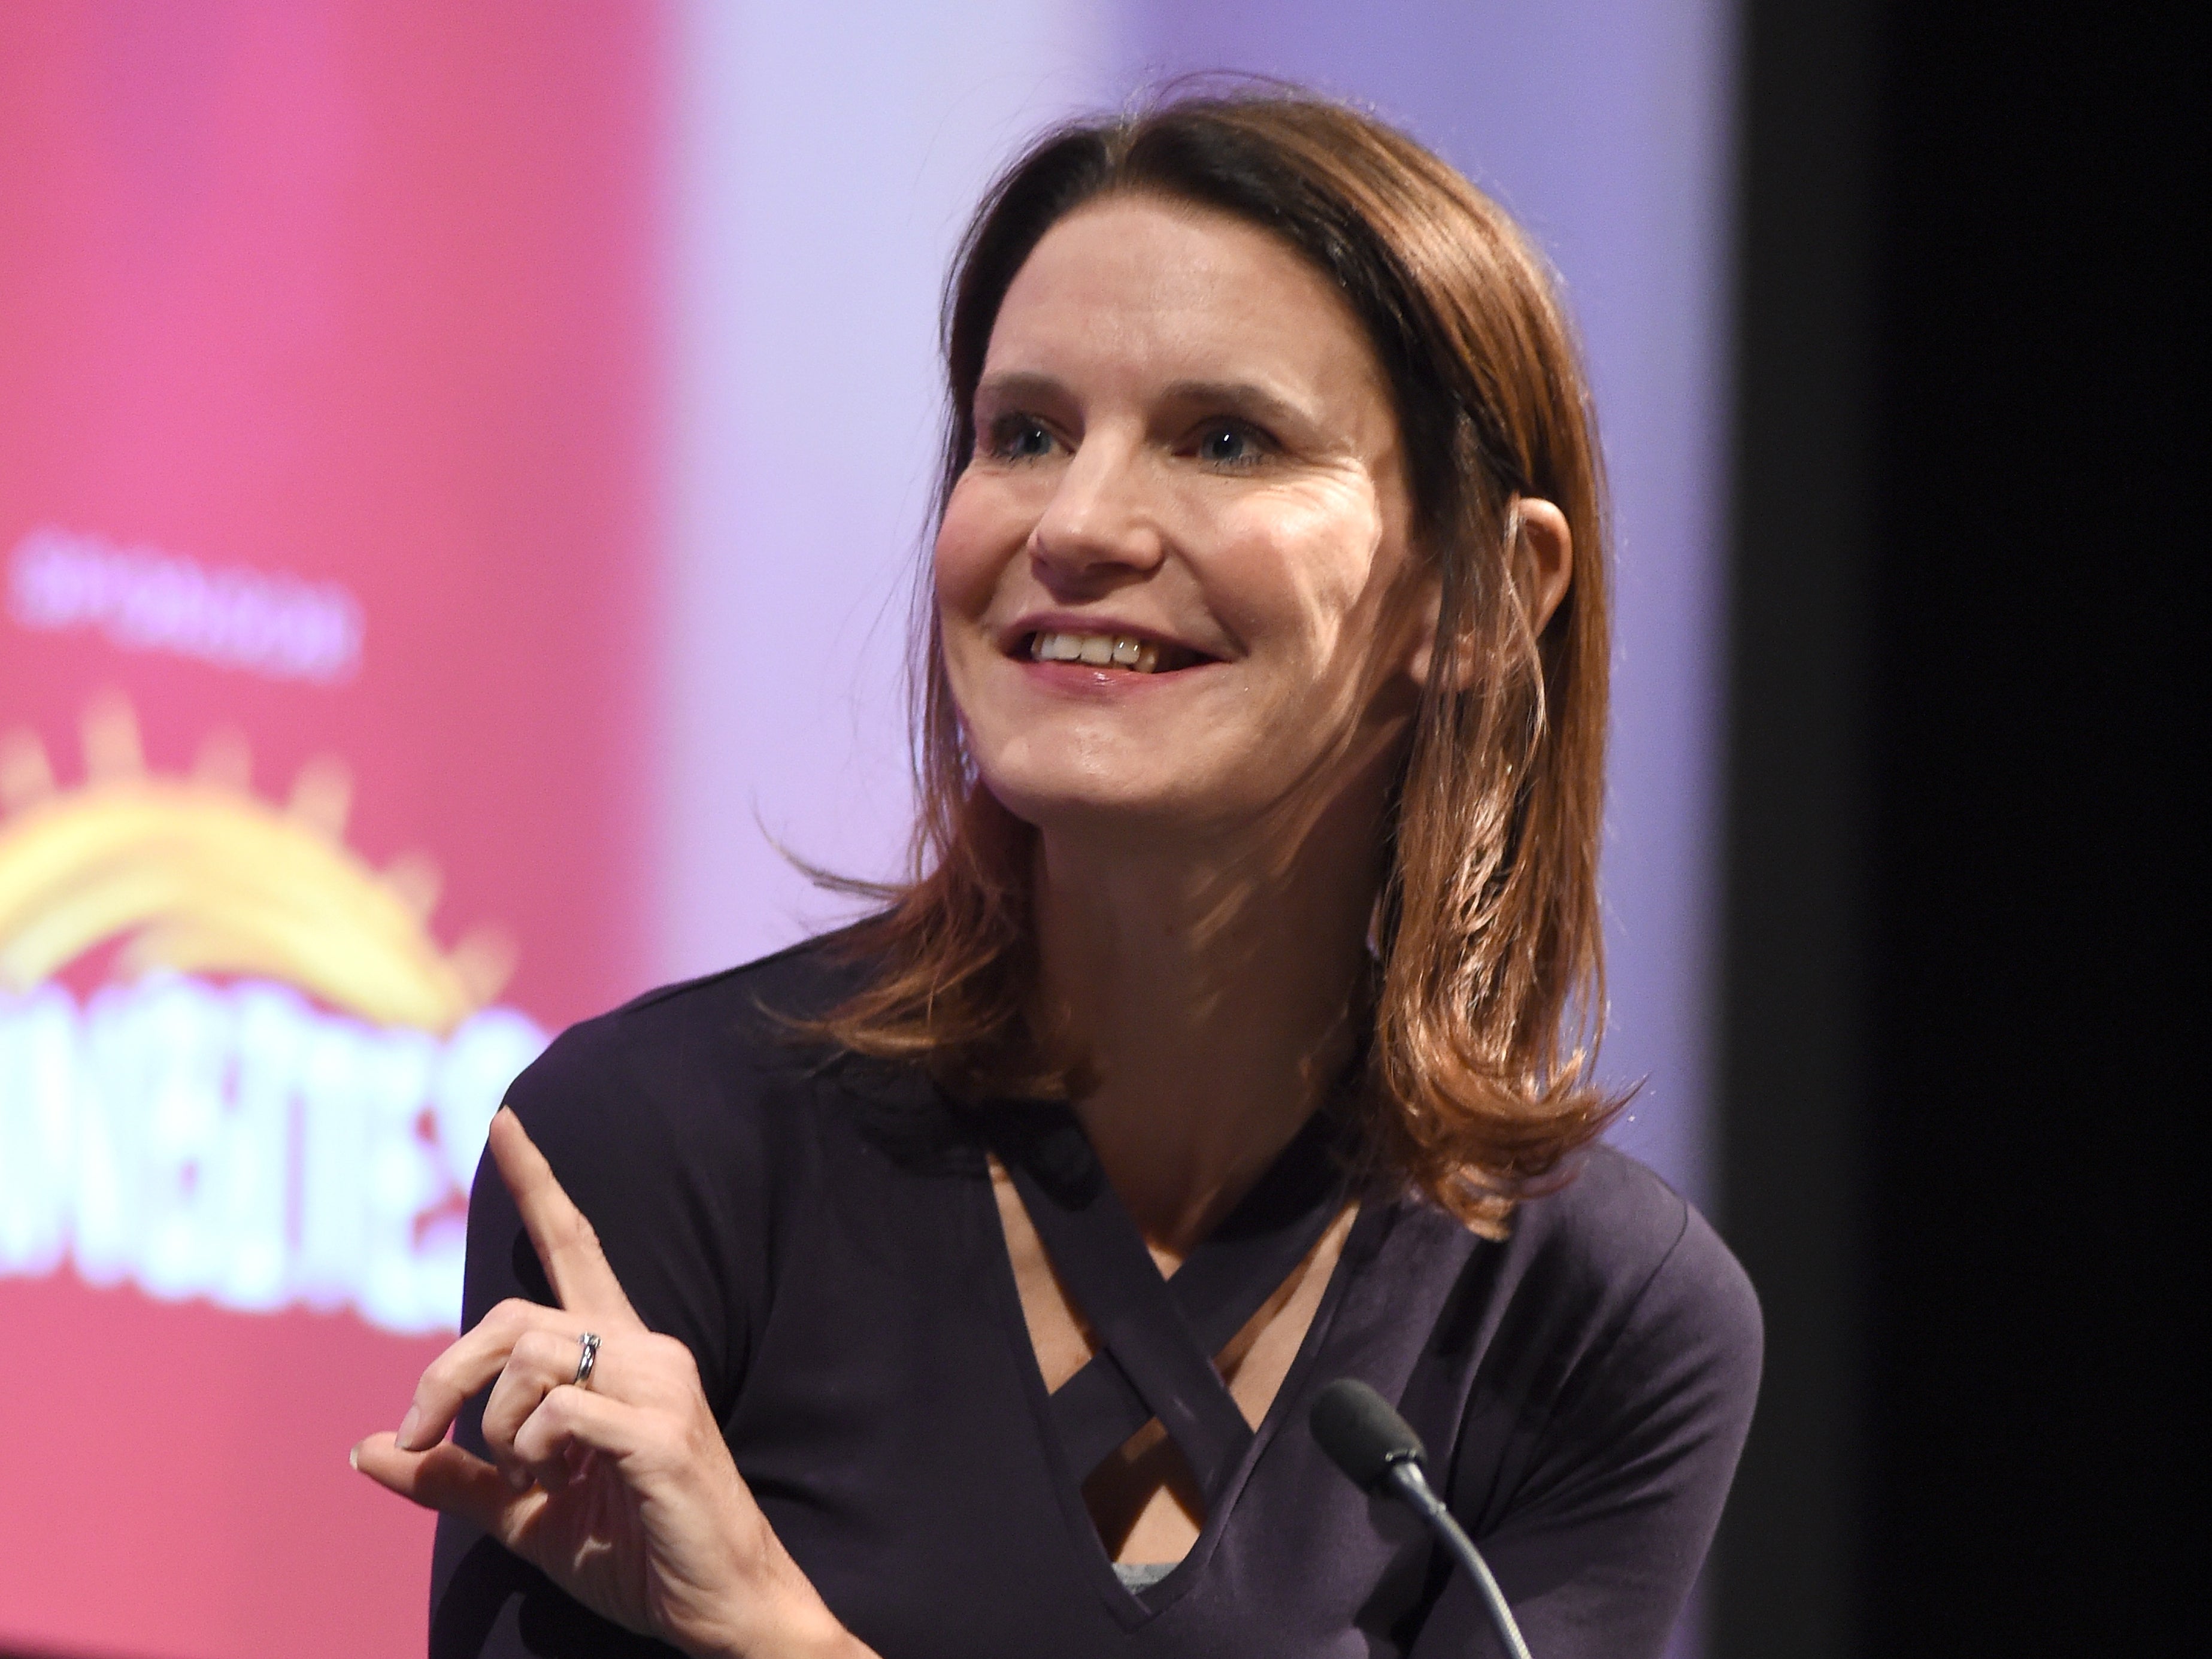 Susie Dent's book was accidentally sent out to booksellers before its release date